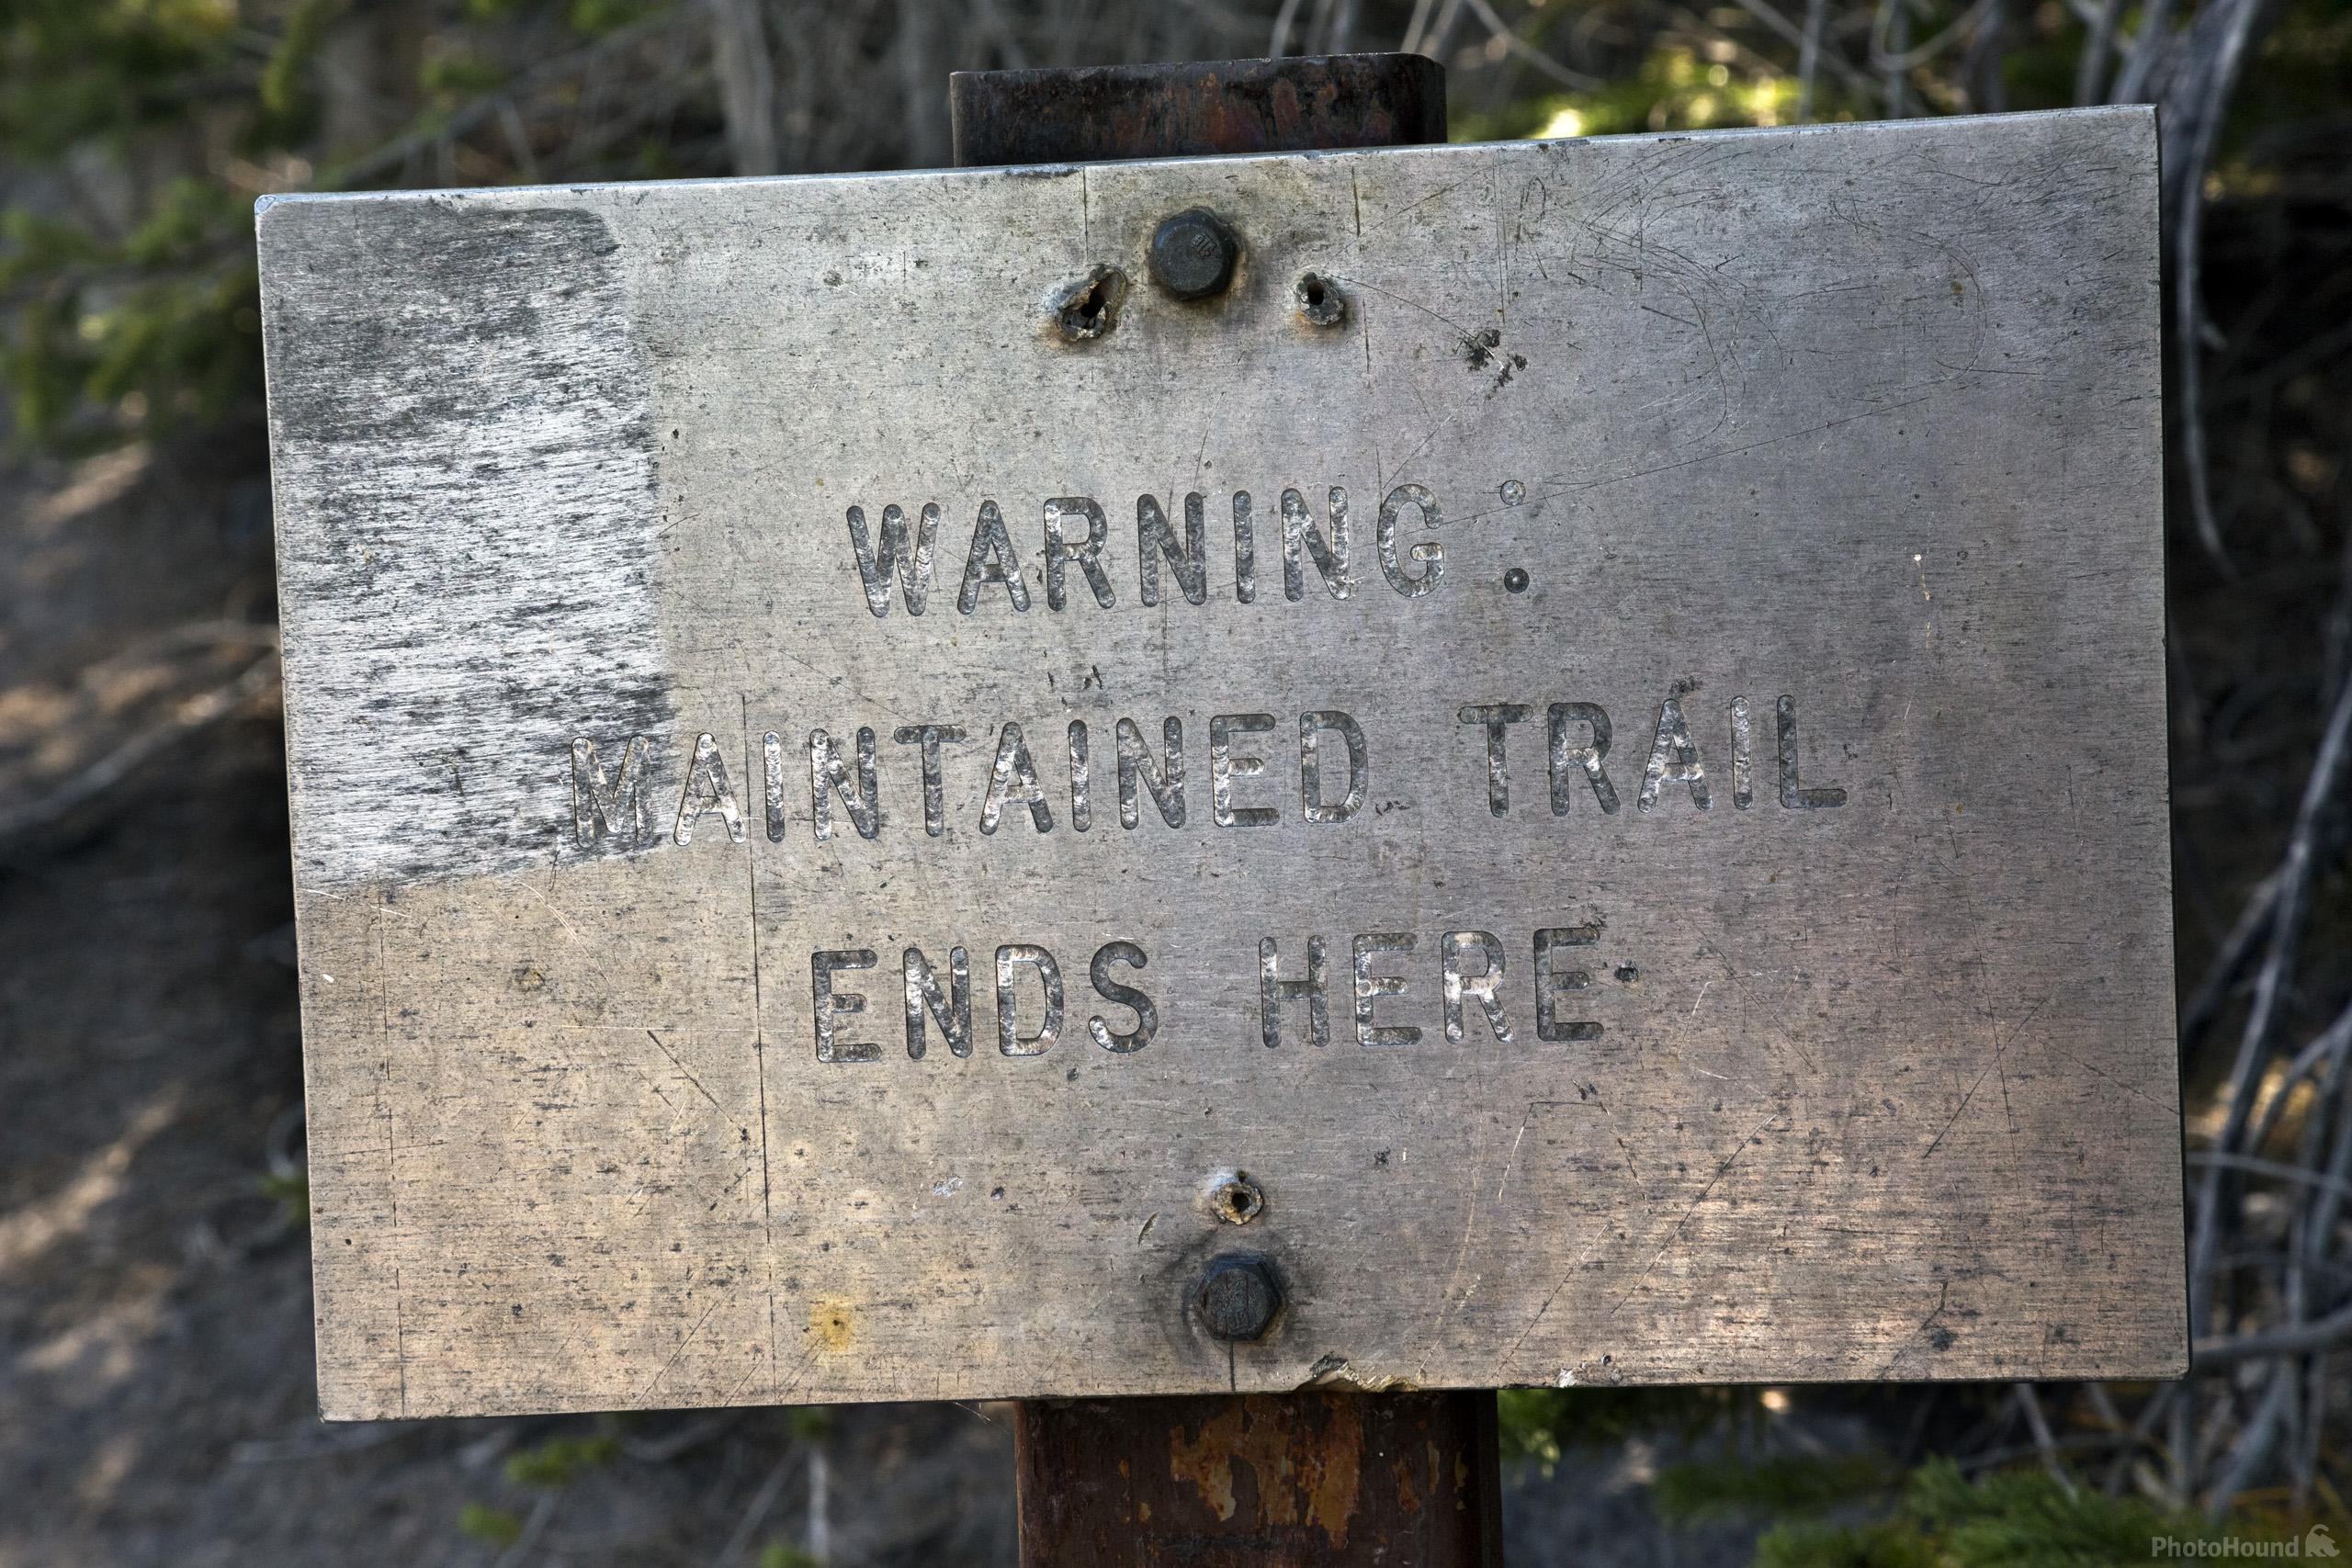 Image of Emmons Moraine Trail, Mount Rainier National Park by T. Kirkendall and V. Spring